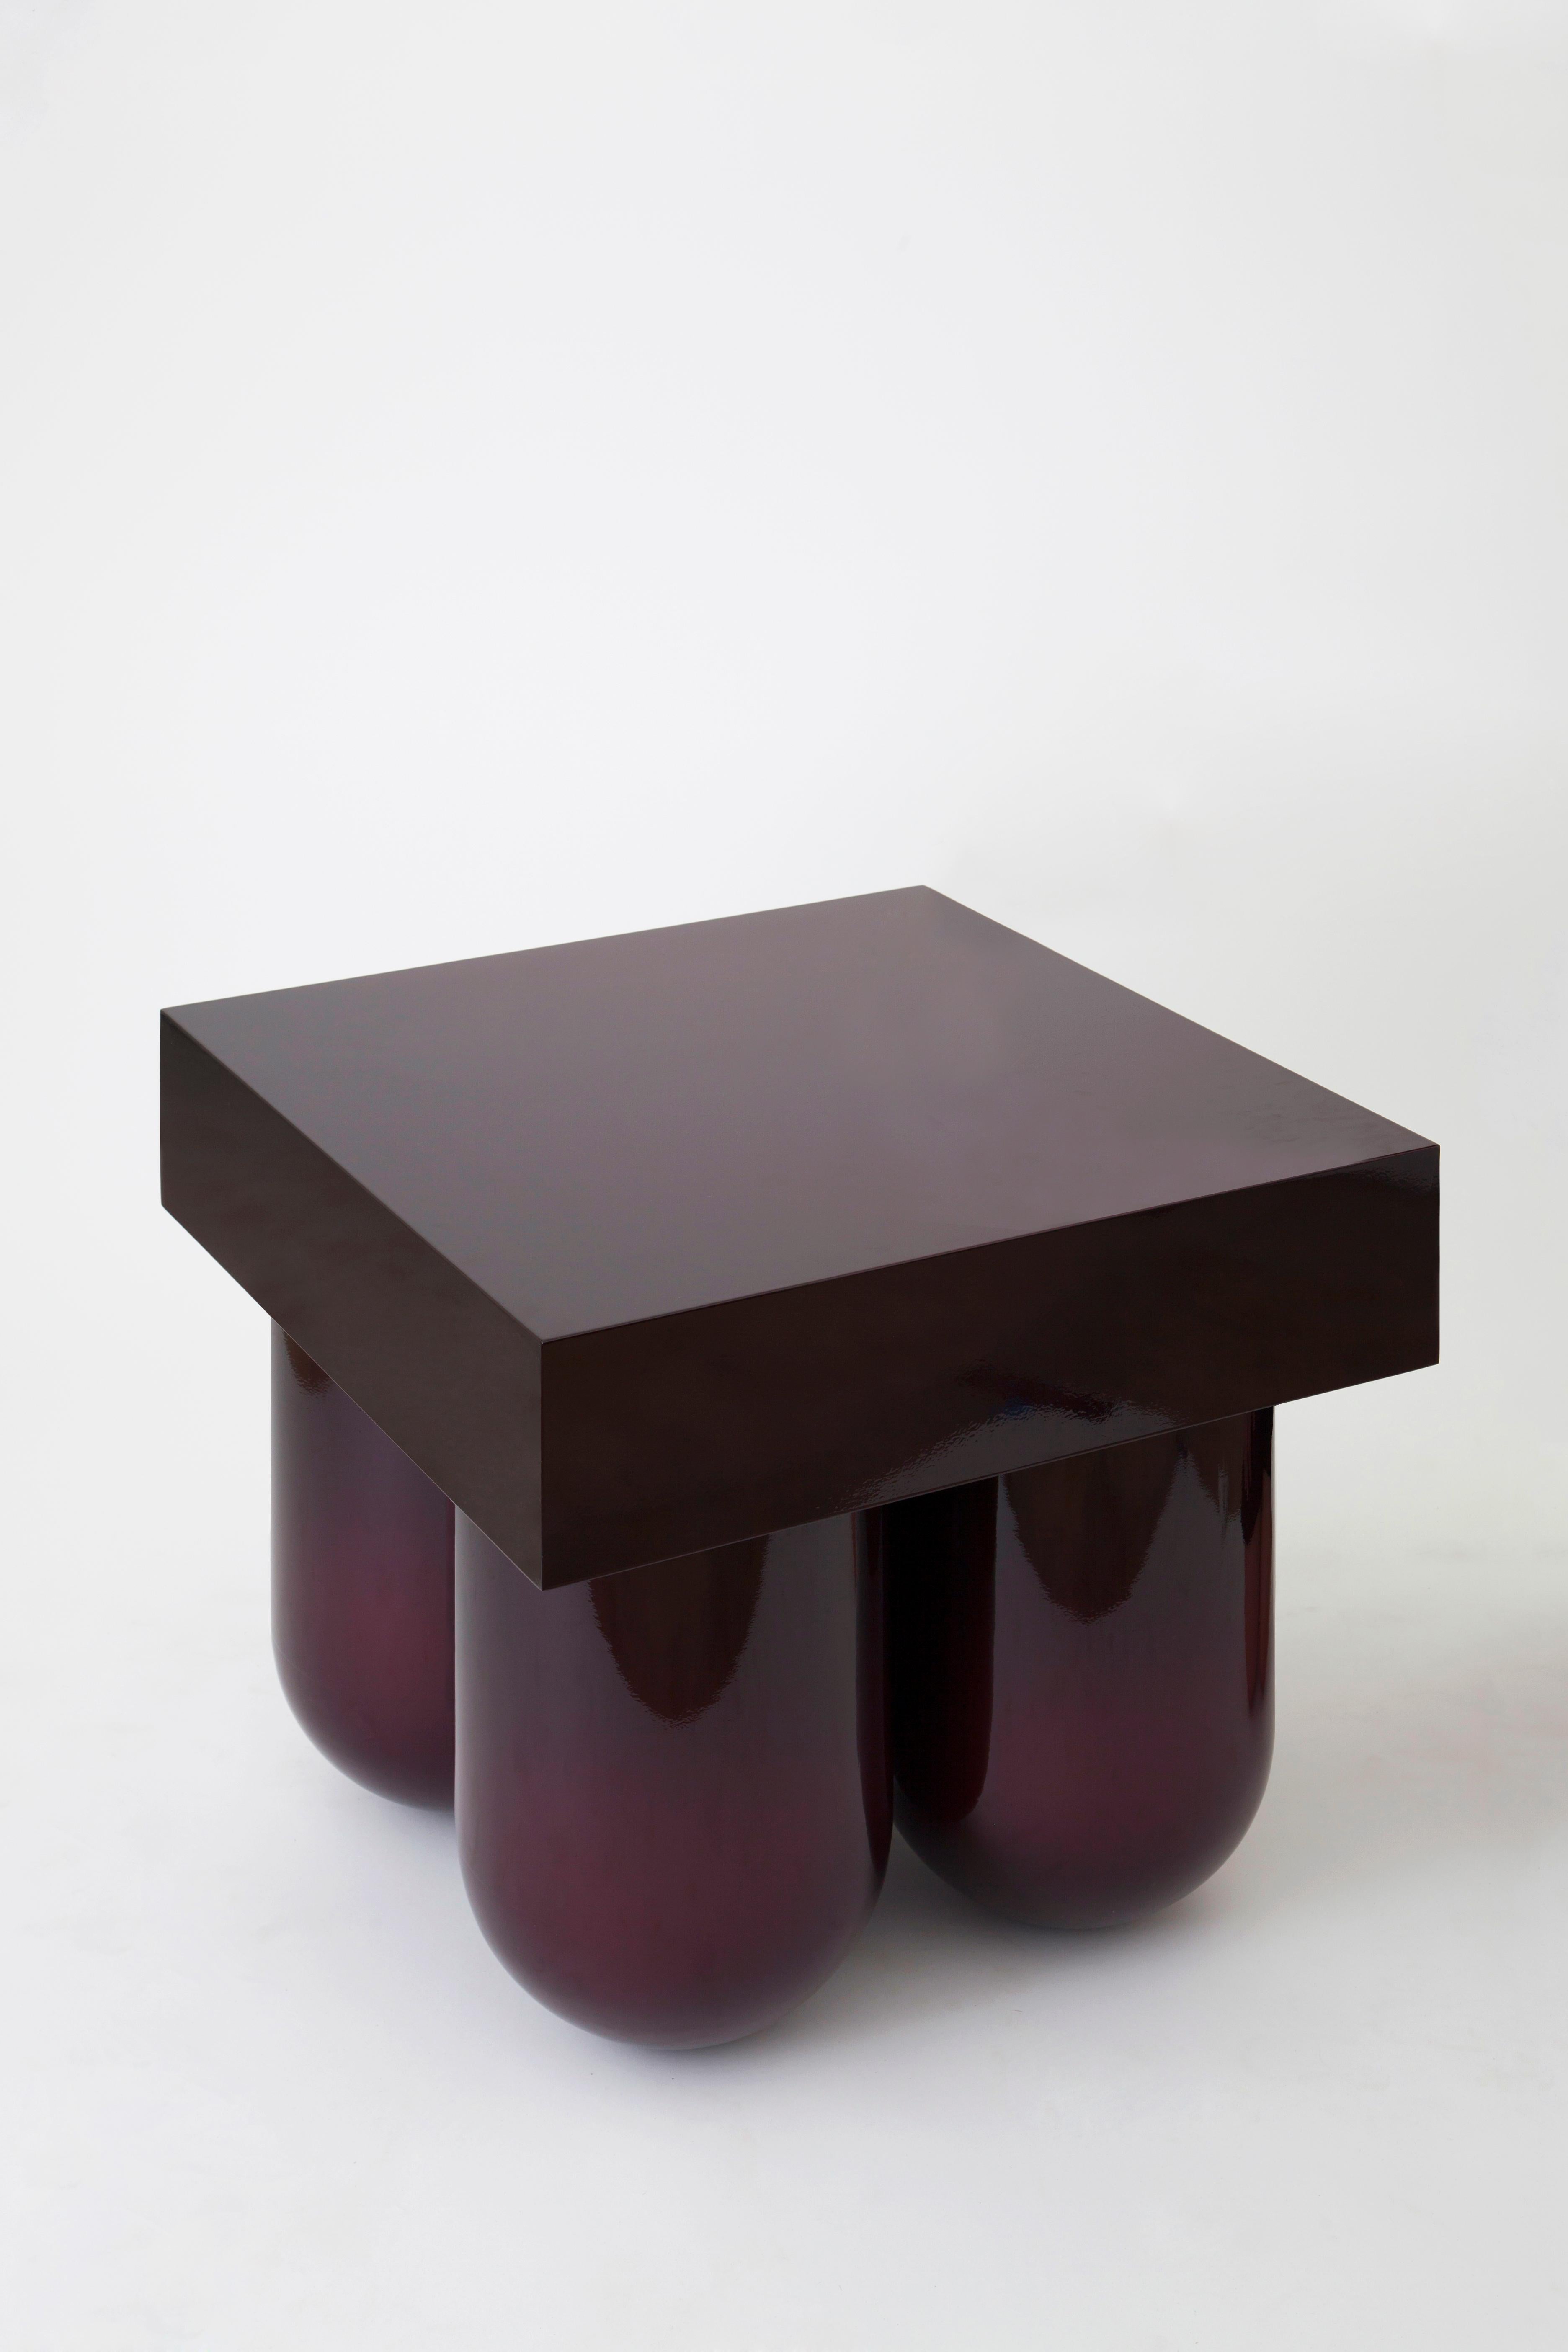 Carved wood set no. 5 table by Müsing-Sellés.
Dimensions: W 60 x D 60 x H 60 cm.
Materials: carved wood, high gloss car-paint metallic lacquer.

Color finish options: maroon/red gradient
indigo / blue gradient
custom color (additional cost &